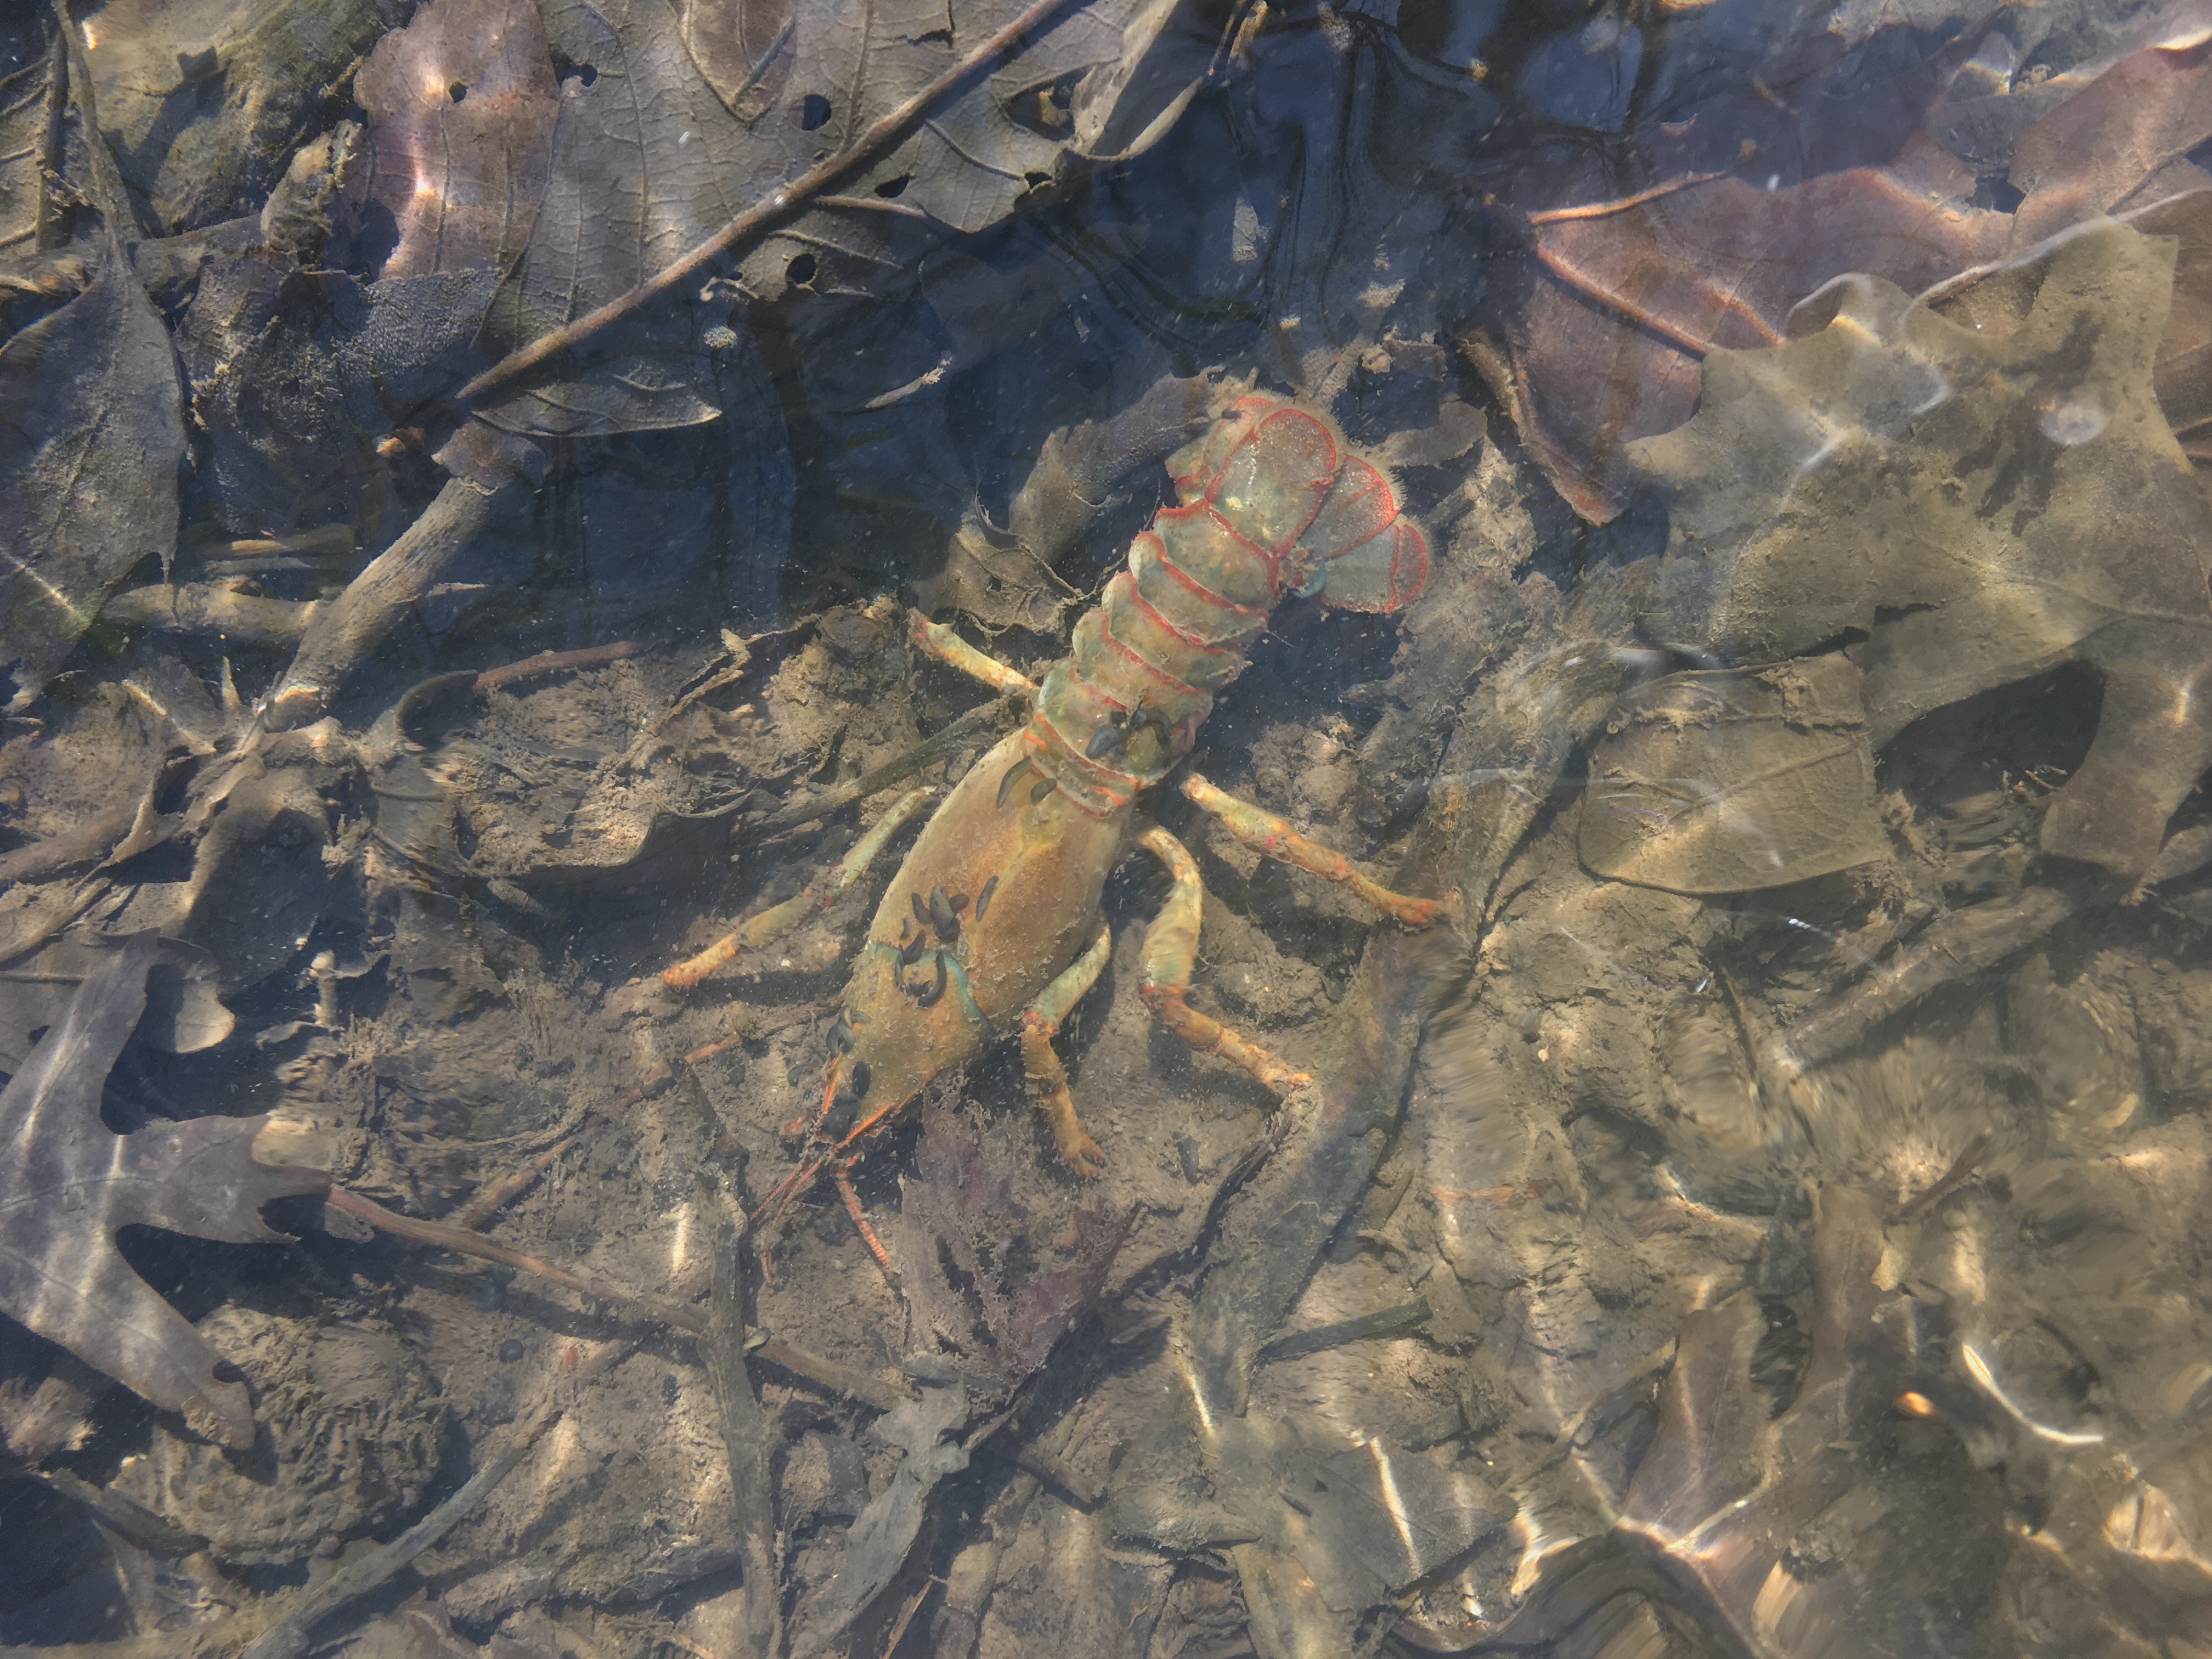 Crayfish in the water